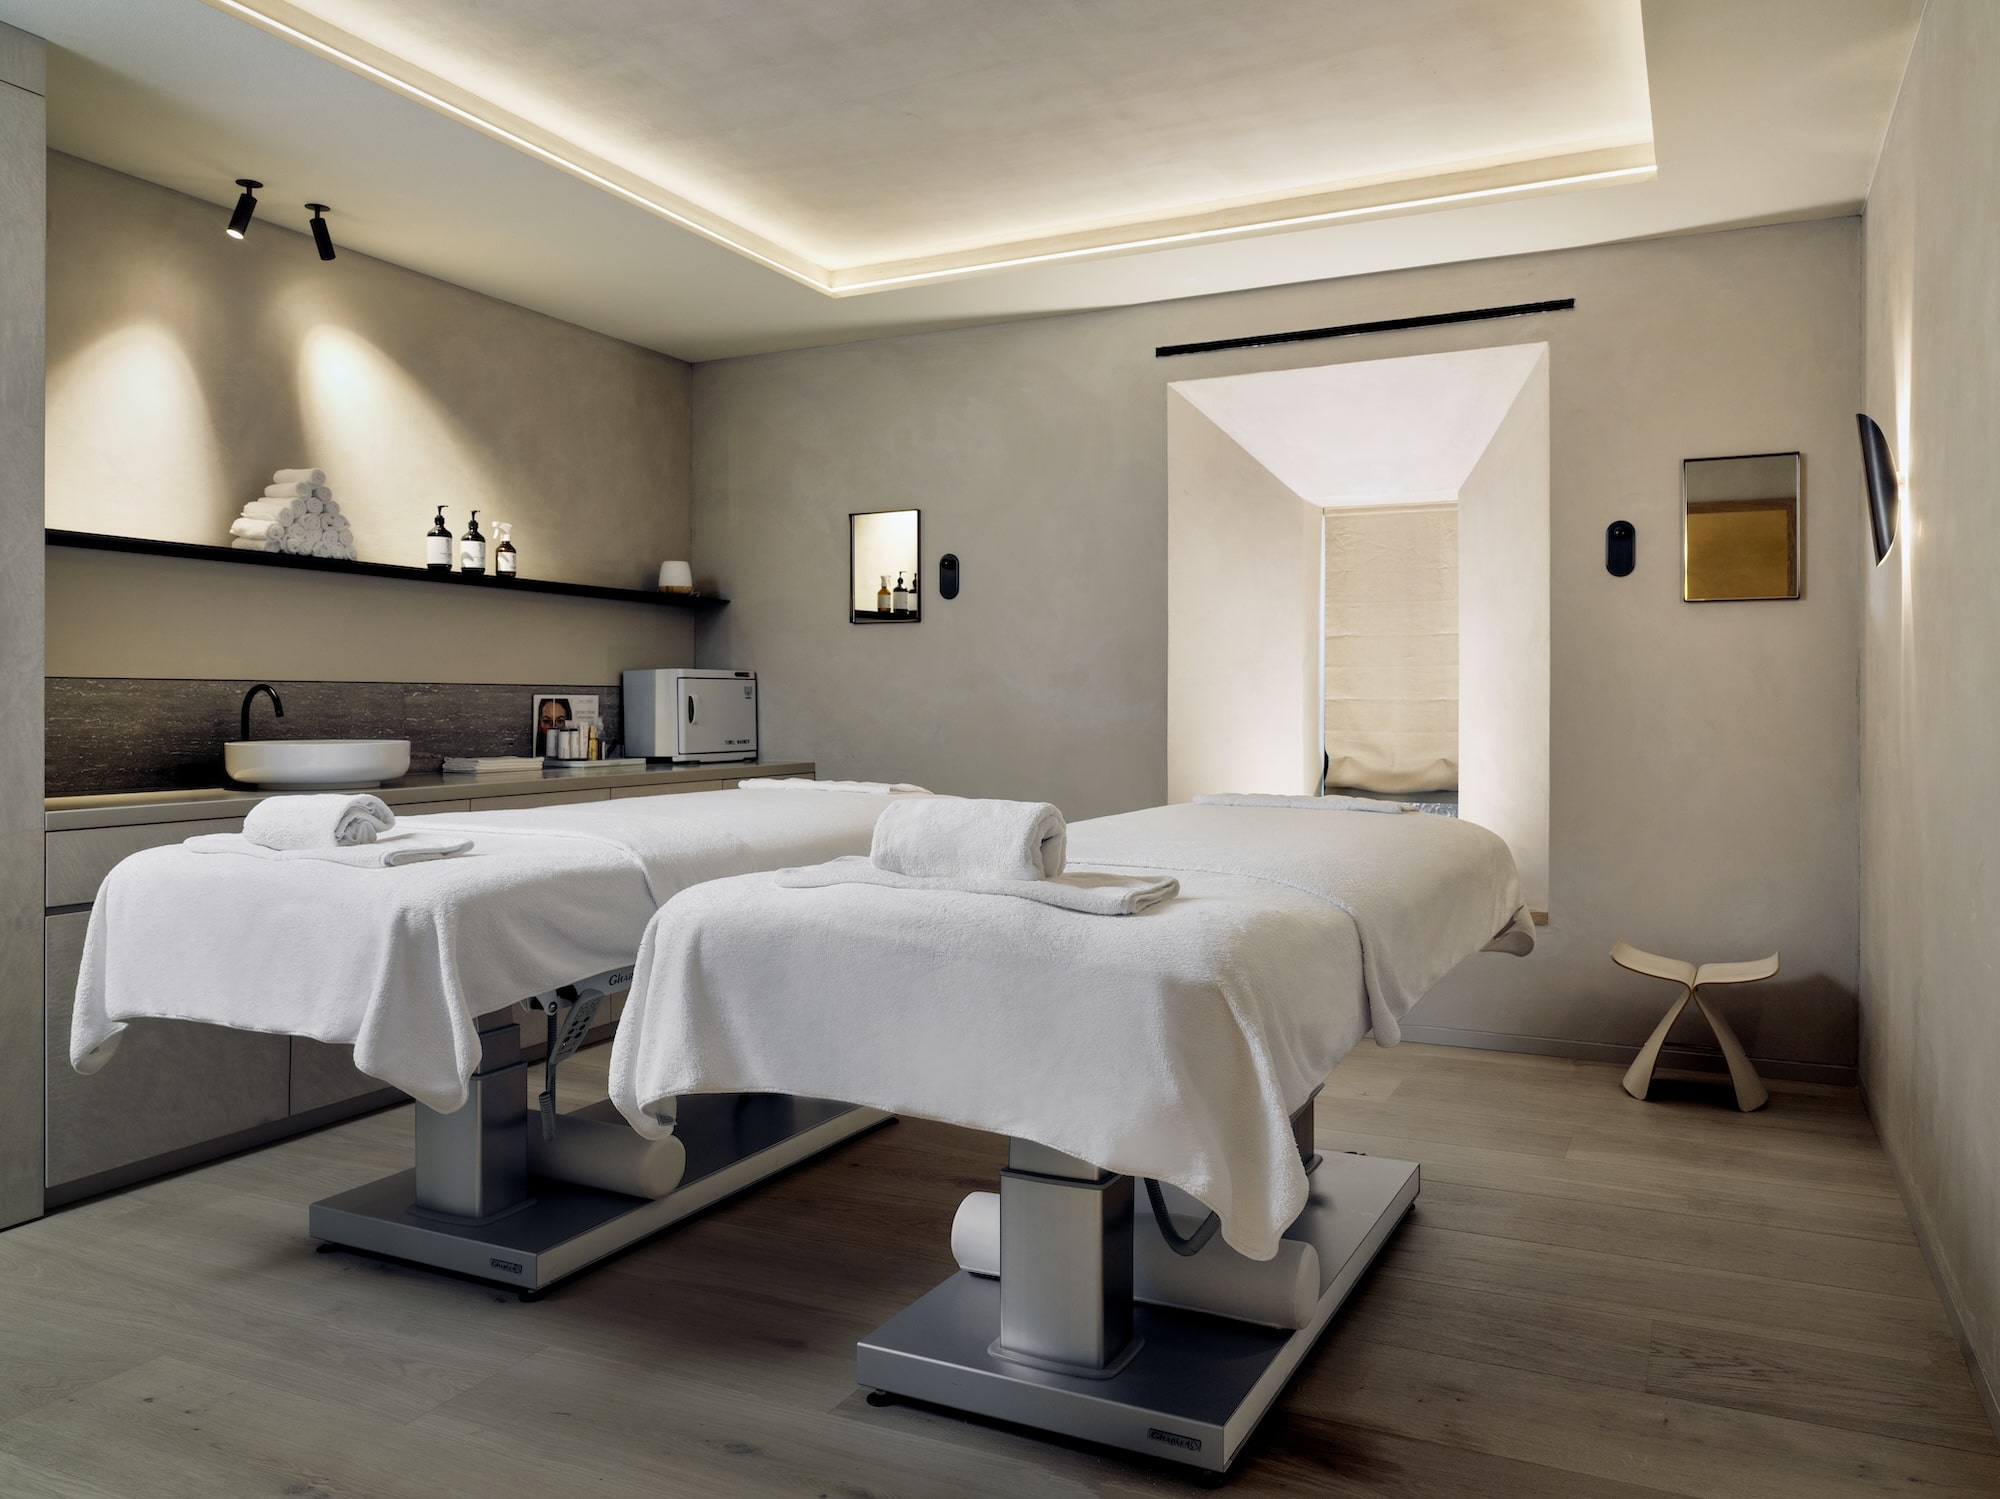 Top noth facilities for a serene spa journey and holistic treatments in Botanic Sanctuary Antwerp